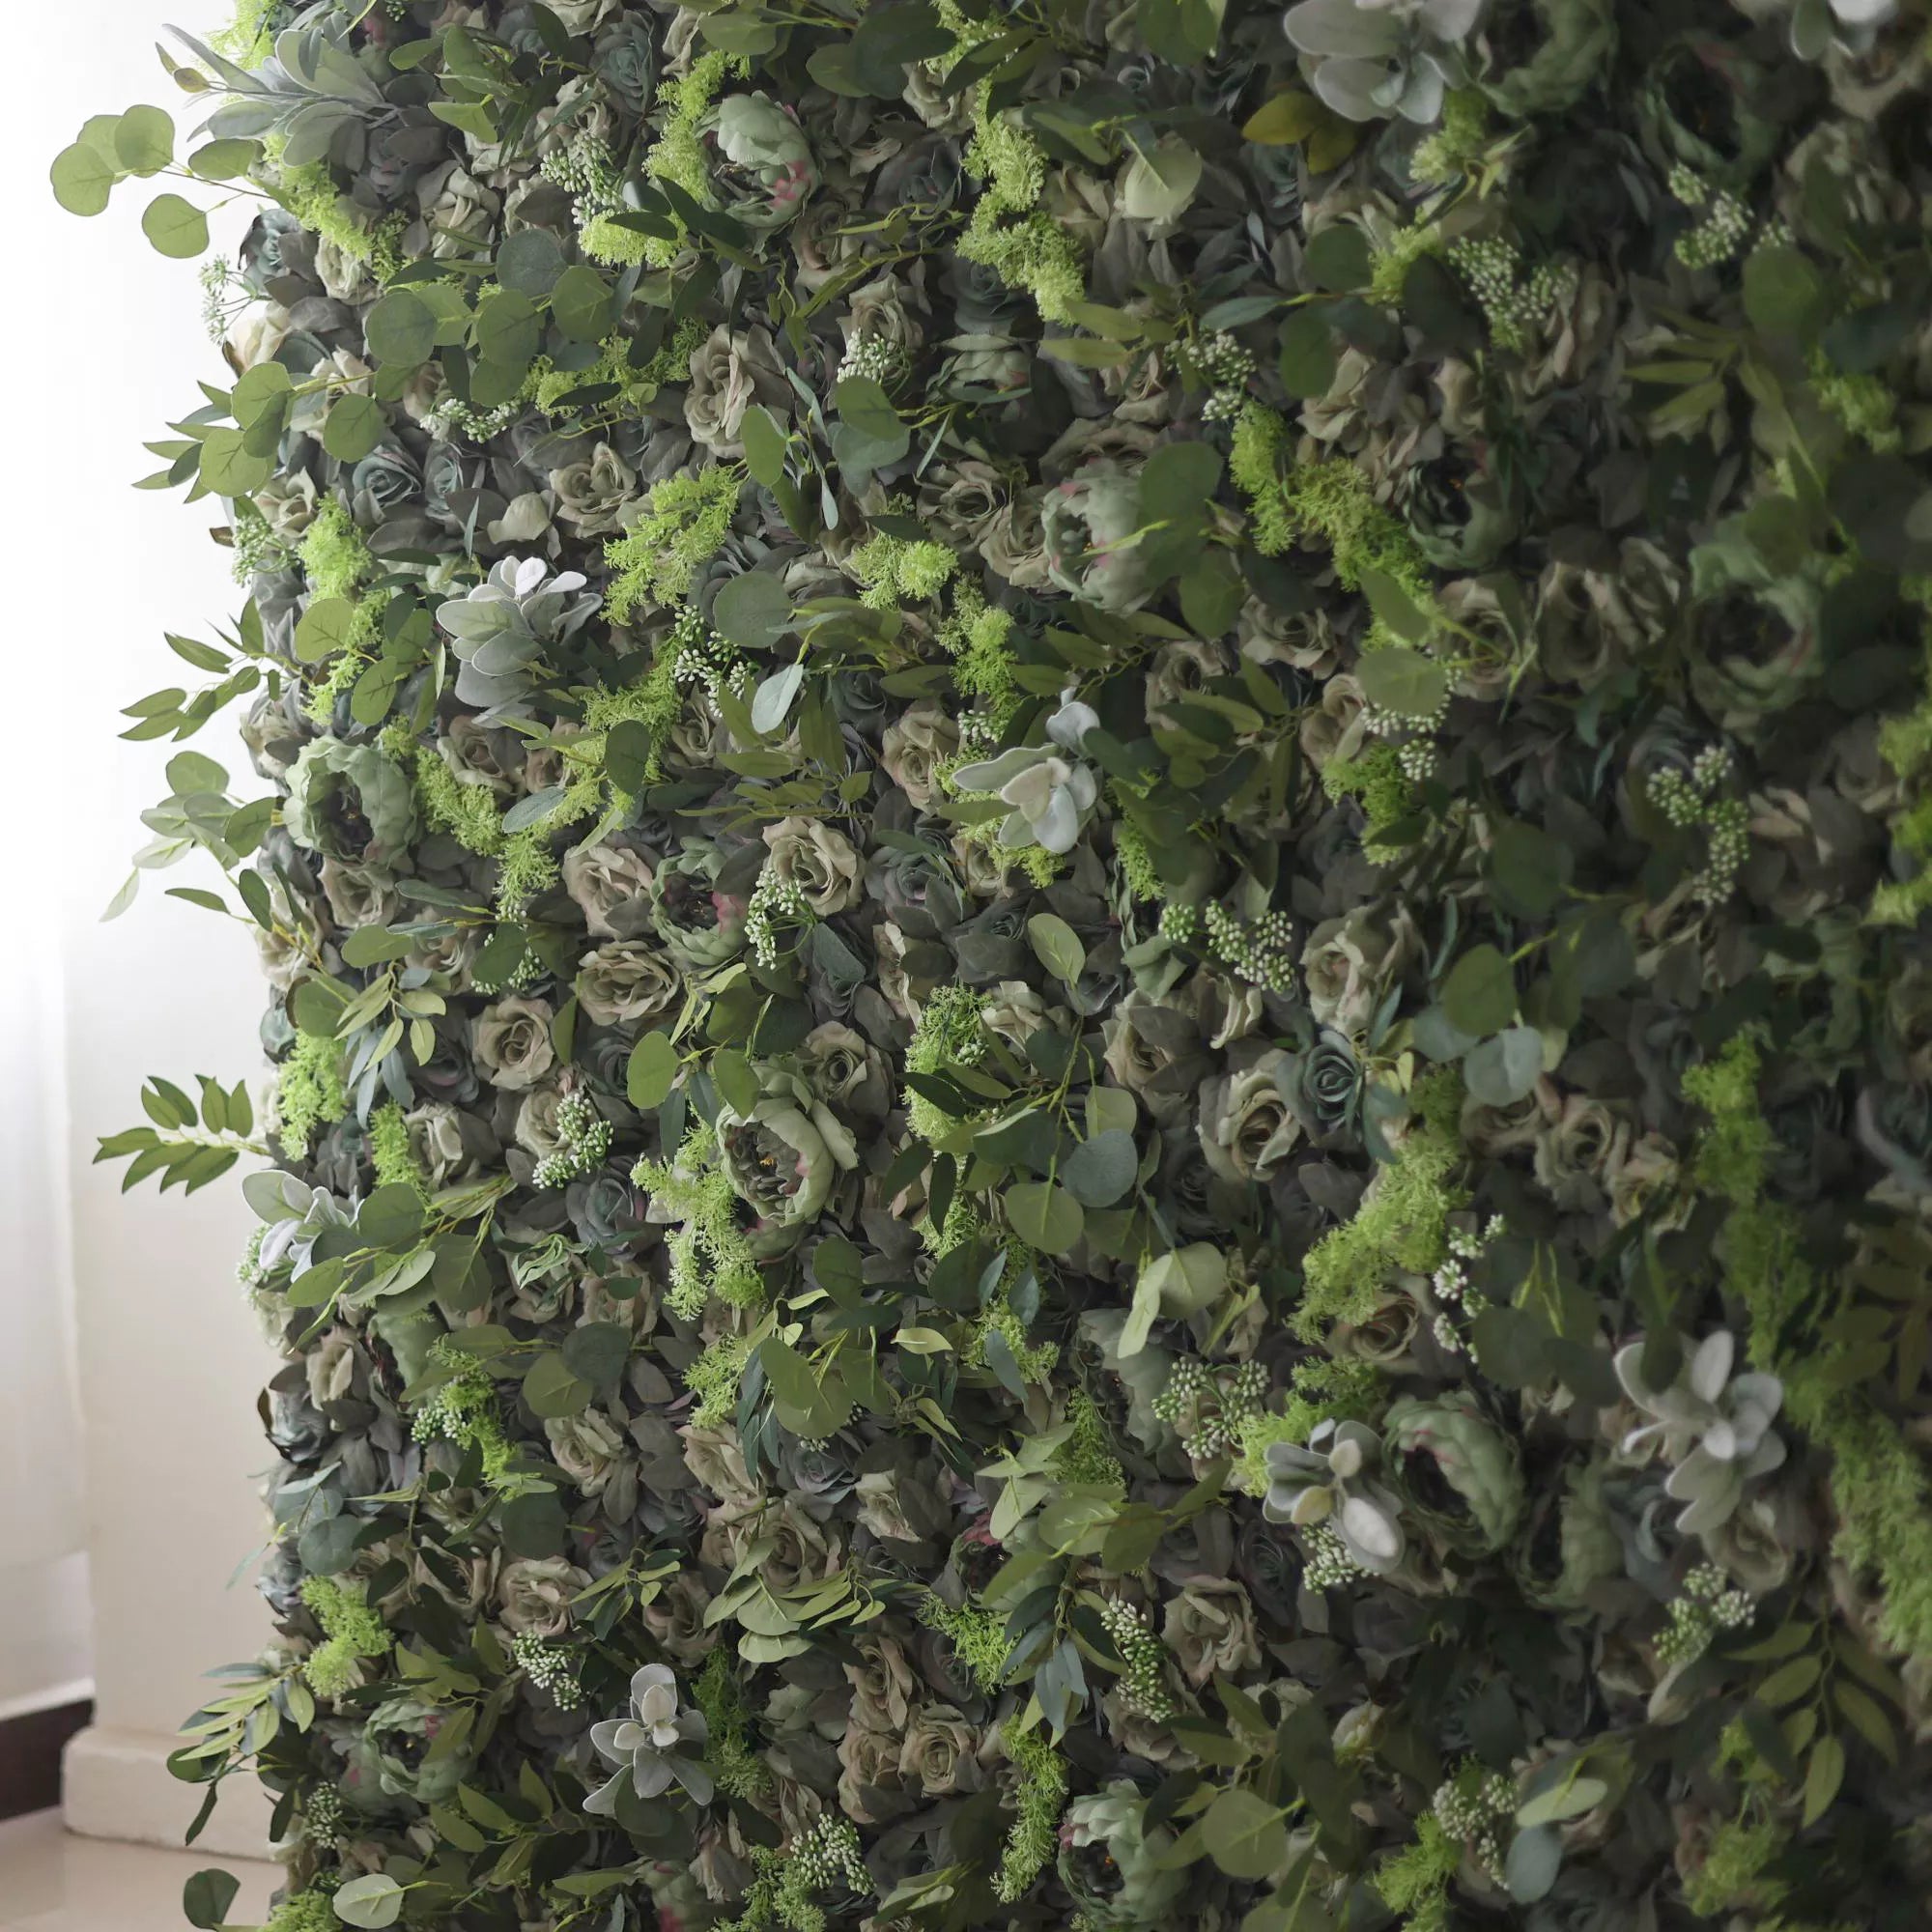 Valar Flowers Presents: Enchanted Forest – A Dense Mélange of Varied Greenery with Subtle White Accents – An Ideal Green Wall for Eco-Conscious Celebrations, Botanical Themes & Naturalistic Interior Designs-VF-222-3